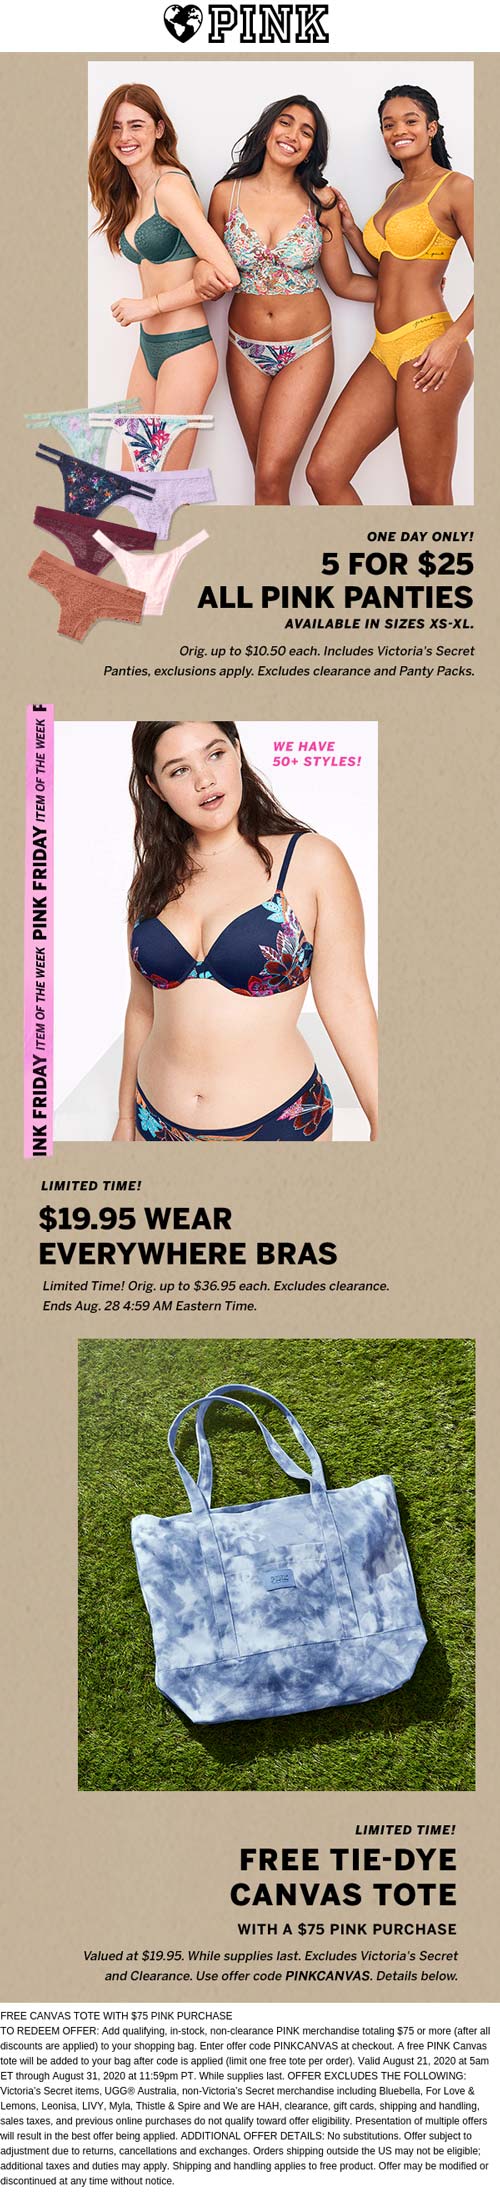 PINK stores Coupon  Free canvas tote on $75 & 5 for $25 panties today at Victorias Secret PINK #pink 